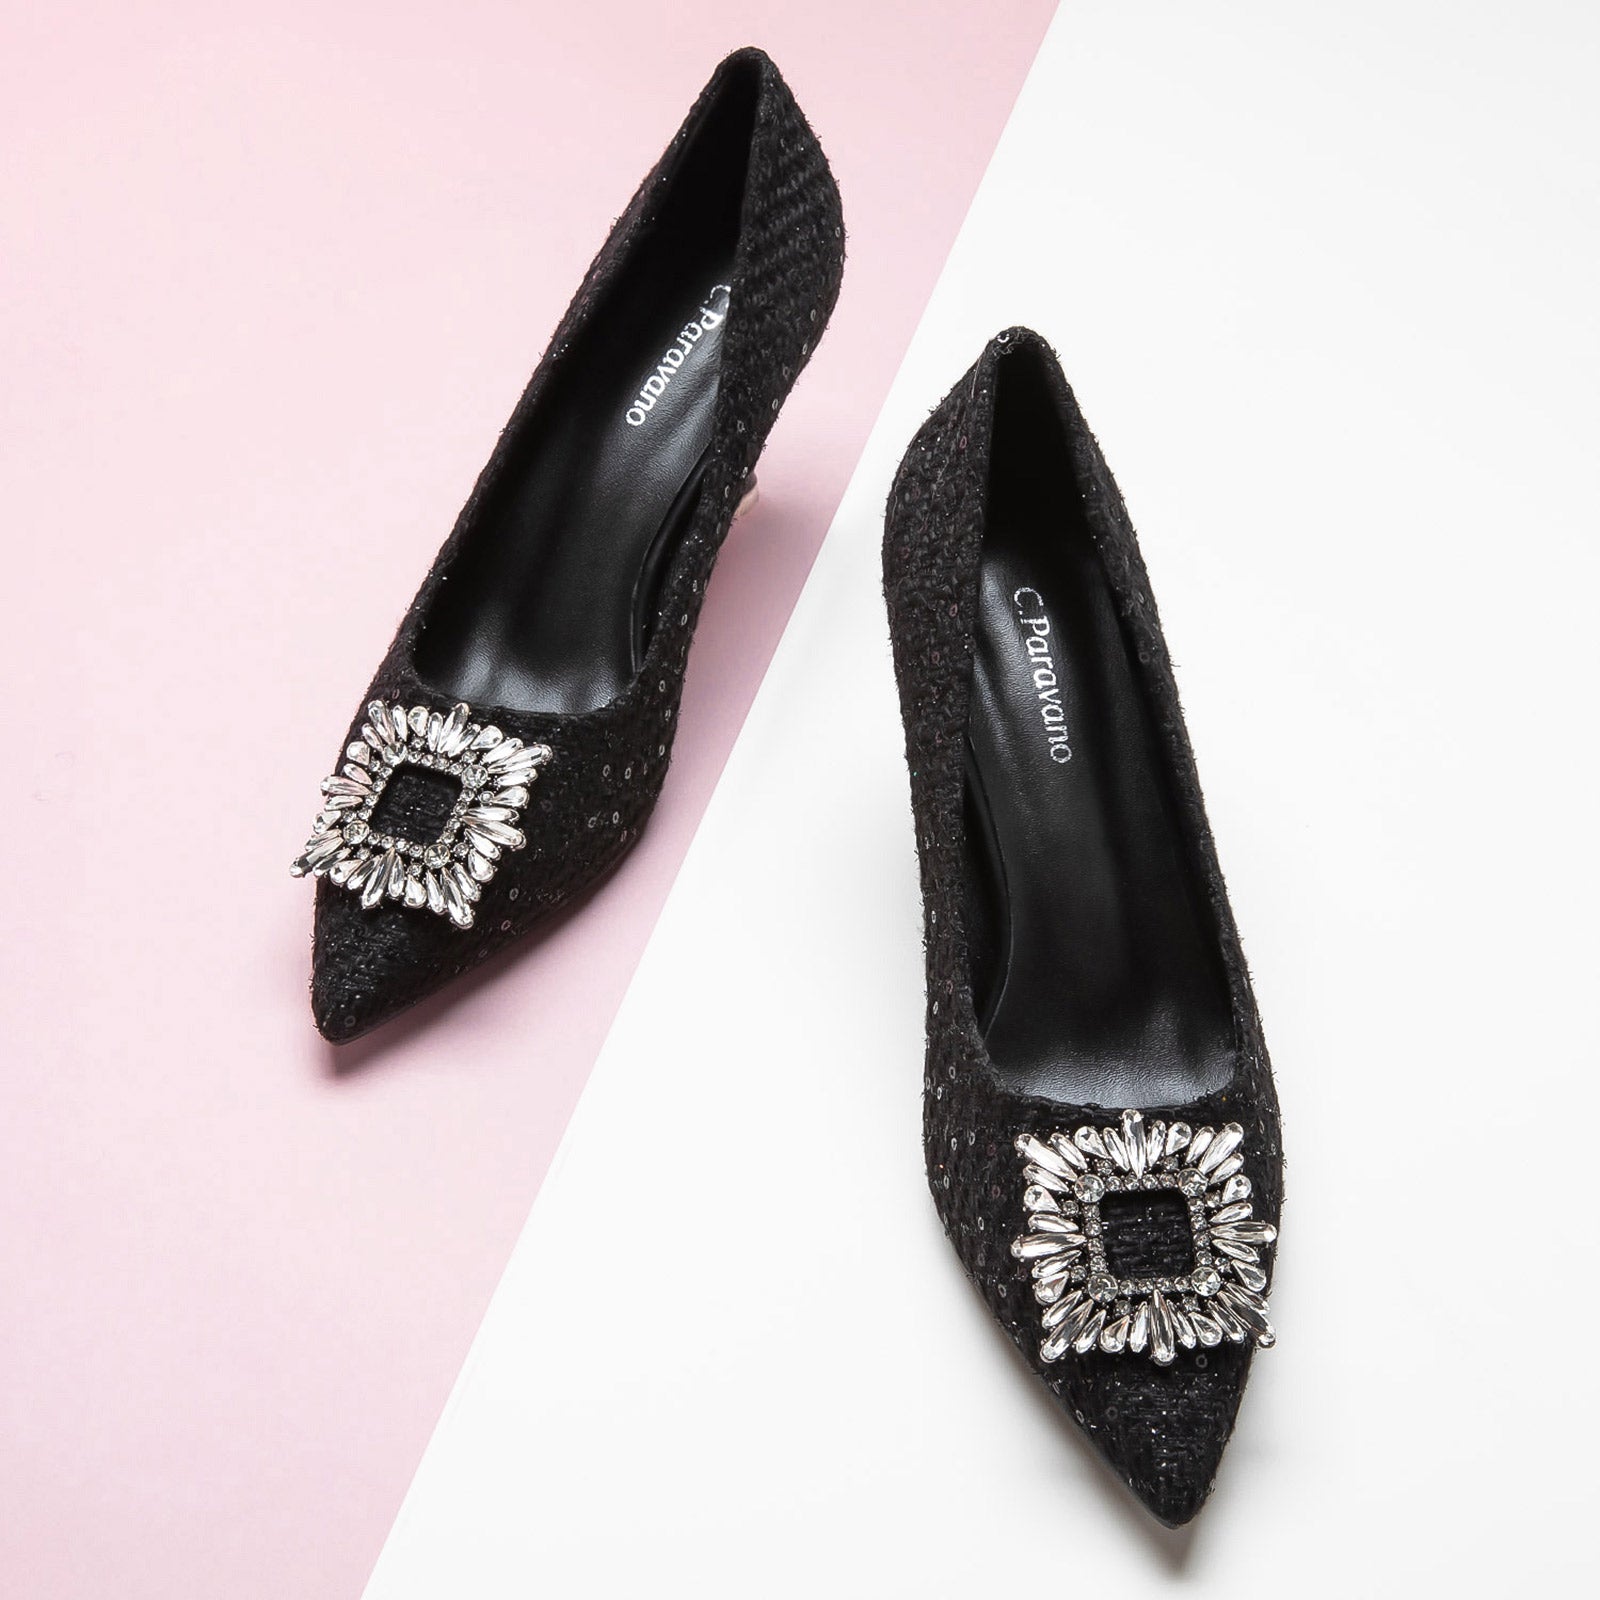 Embellished Square Buckle Pumps in Black Glitter, perfect for a stylish night out